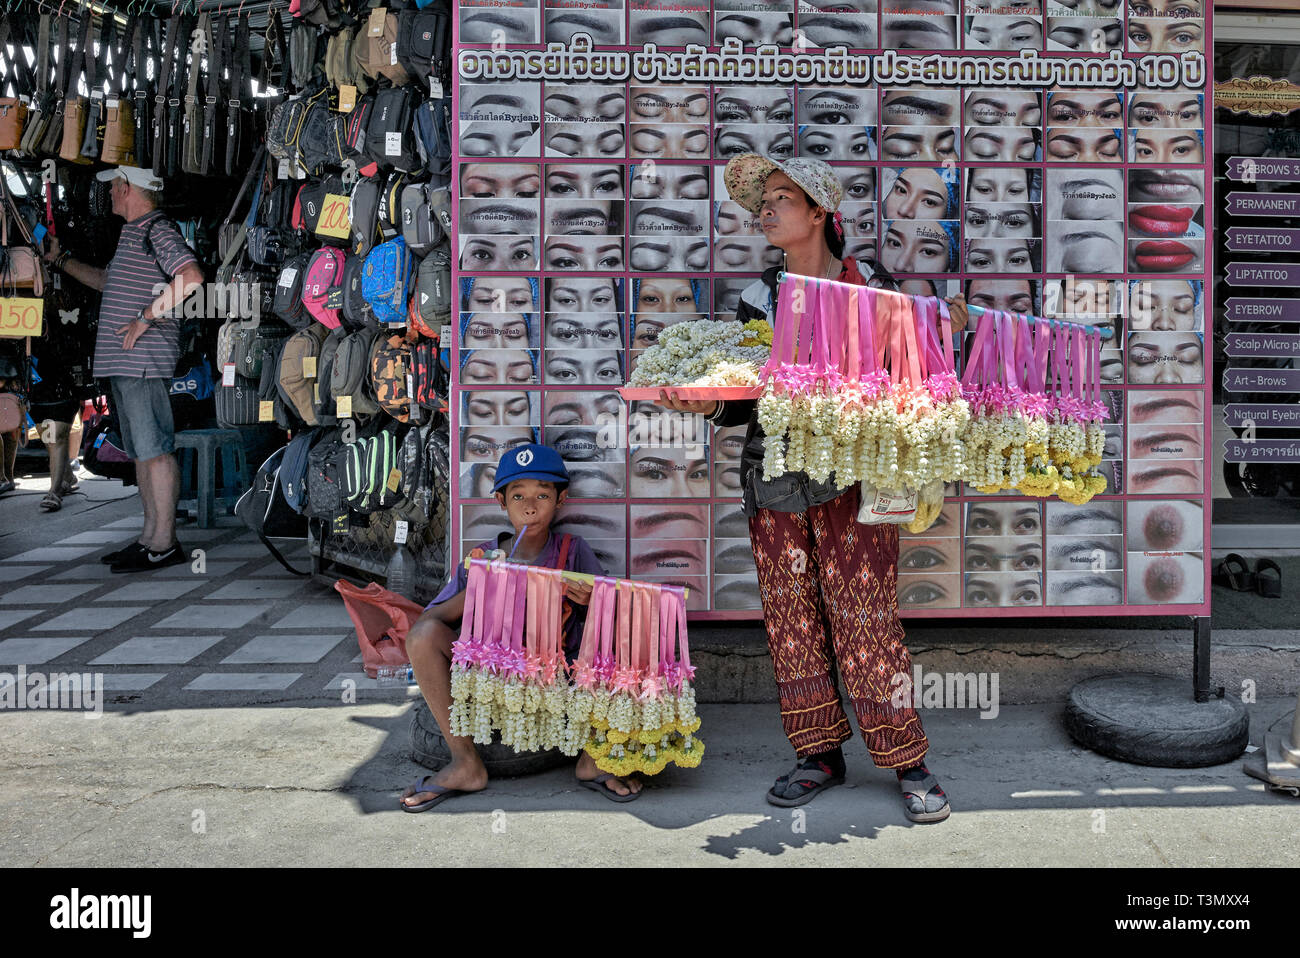 Thailand street vendor. Mother and her child selling scented flowers against an eye catching billboard Stock Photo